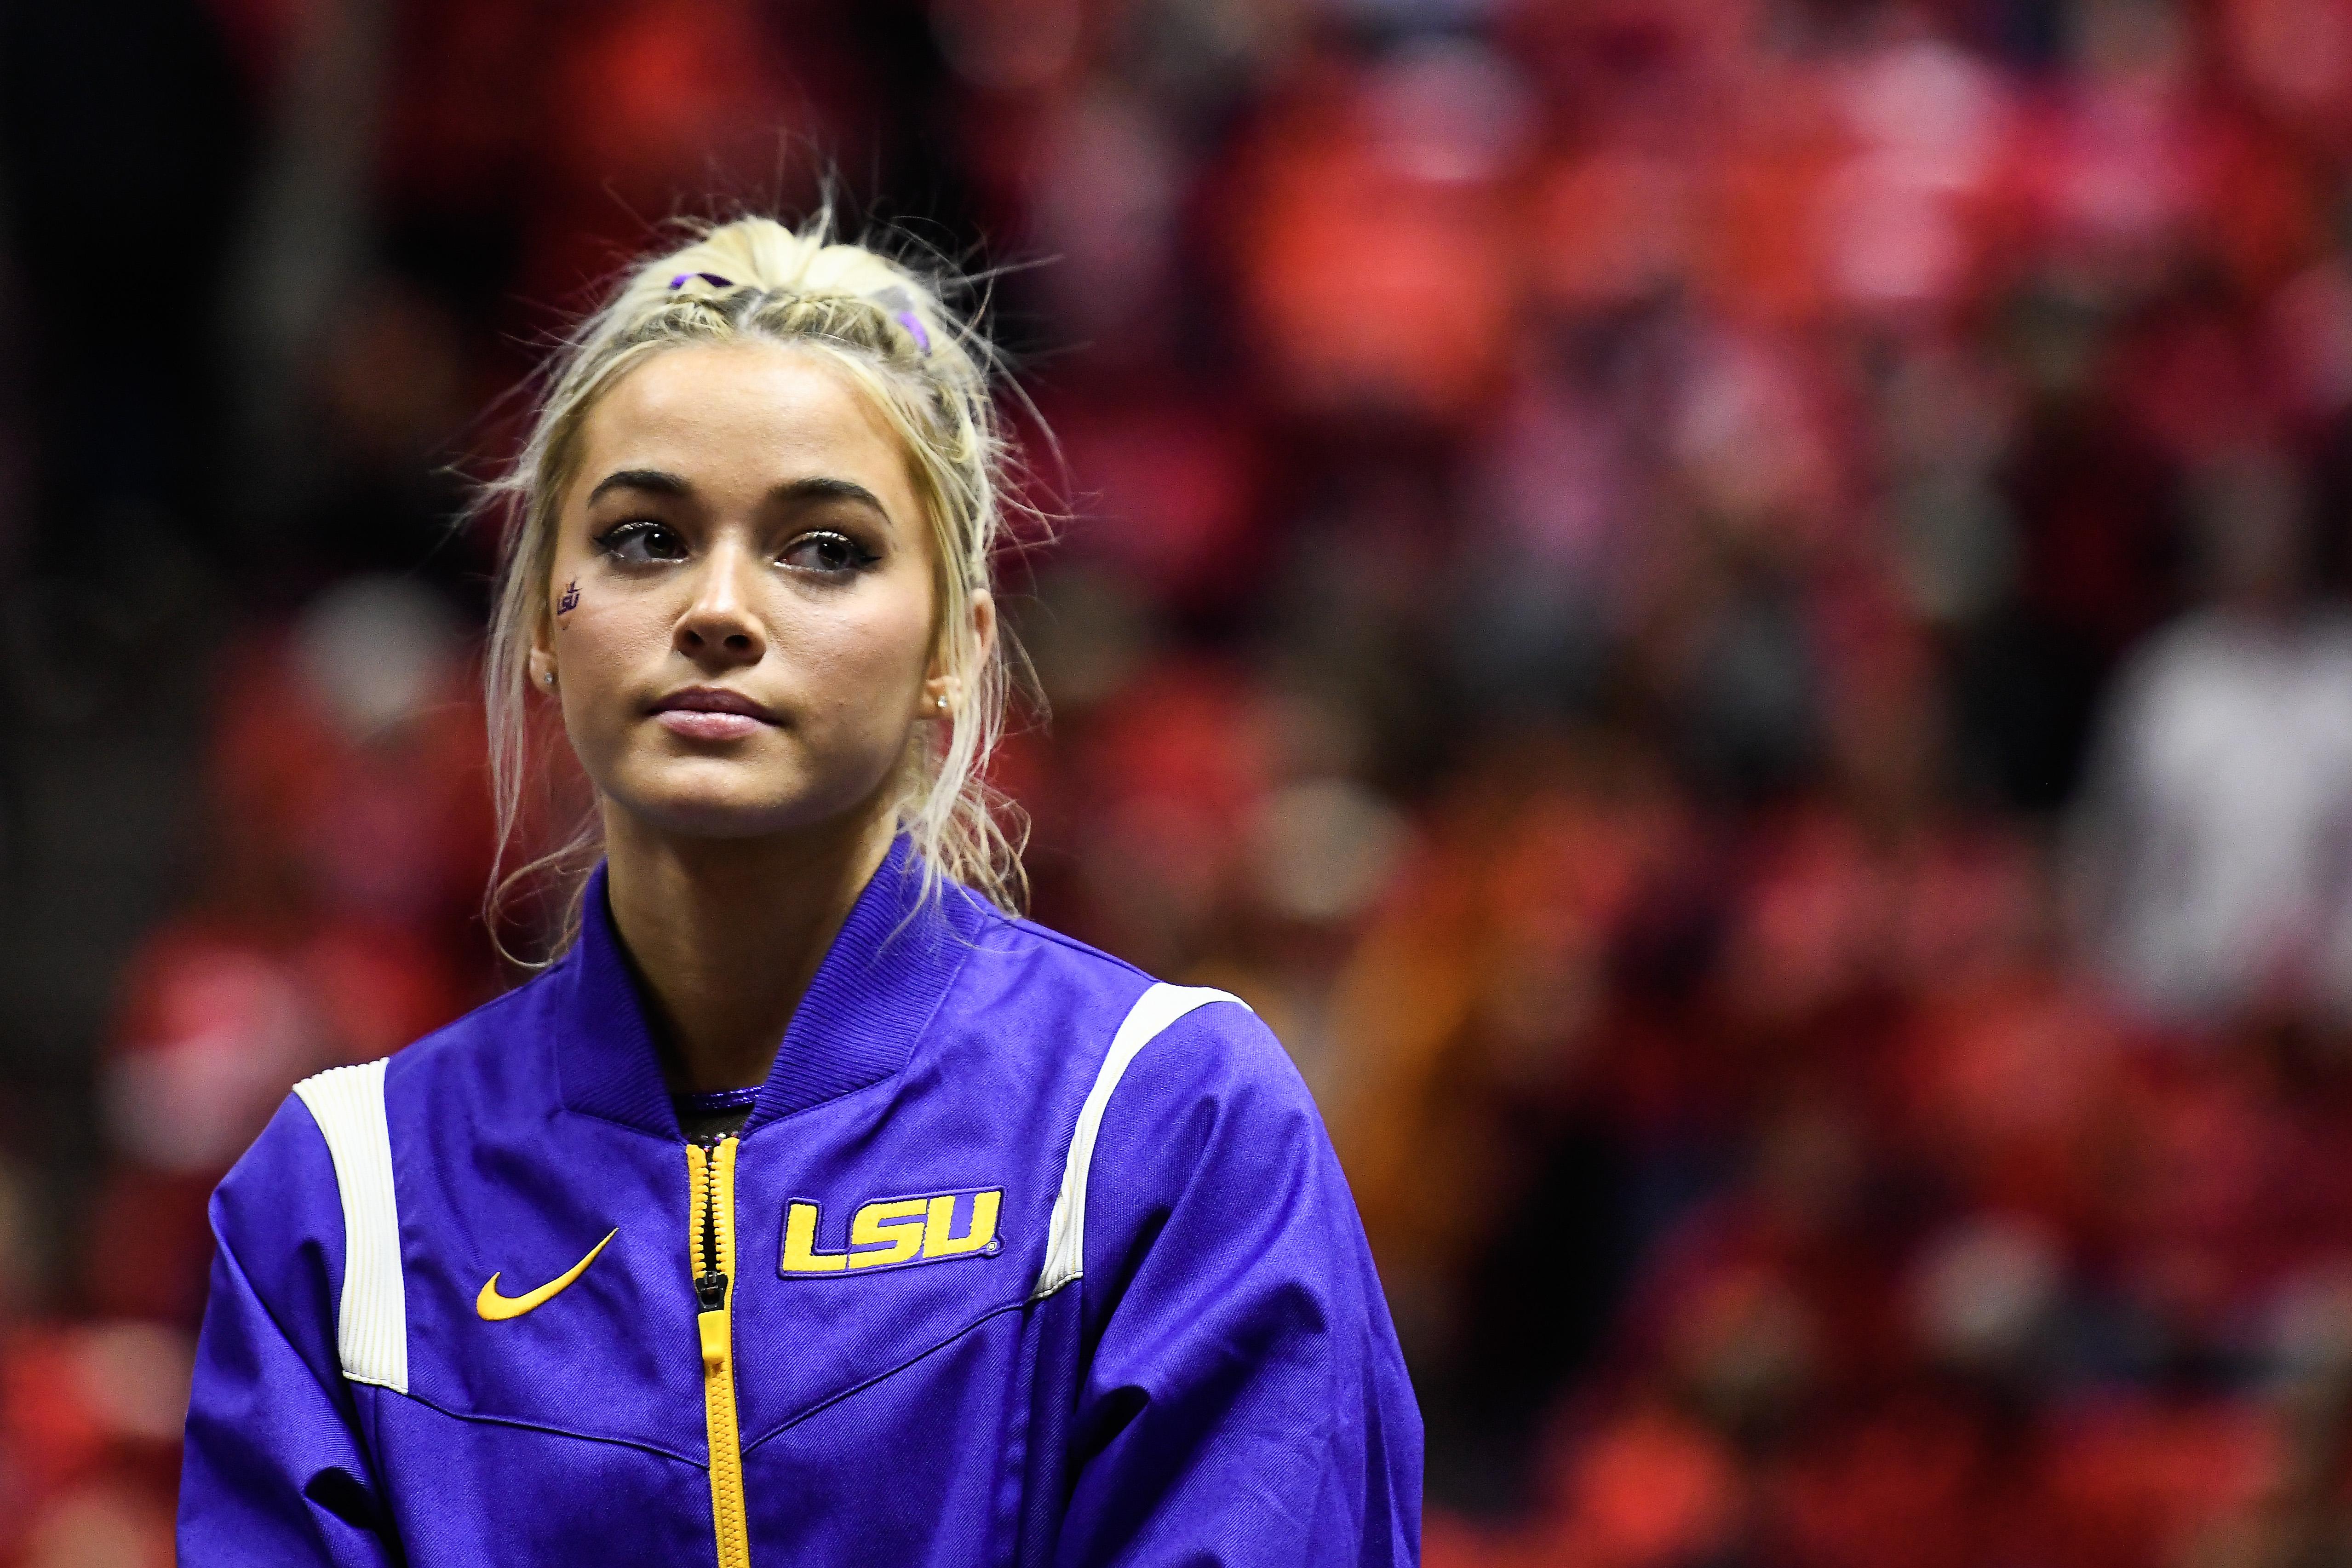 Dunne in her LSU warmup jacket giving a side-eye